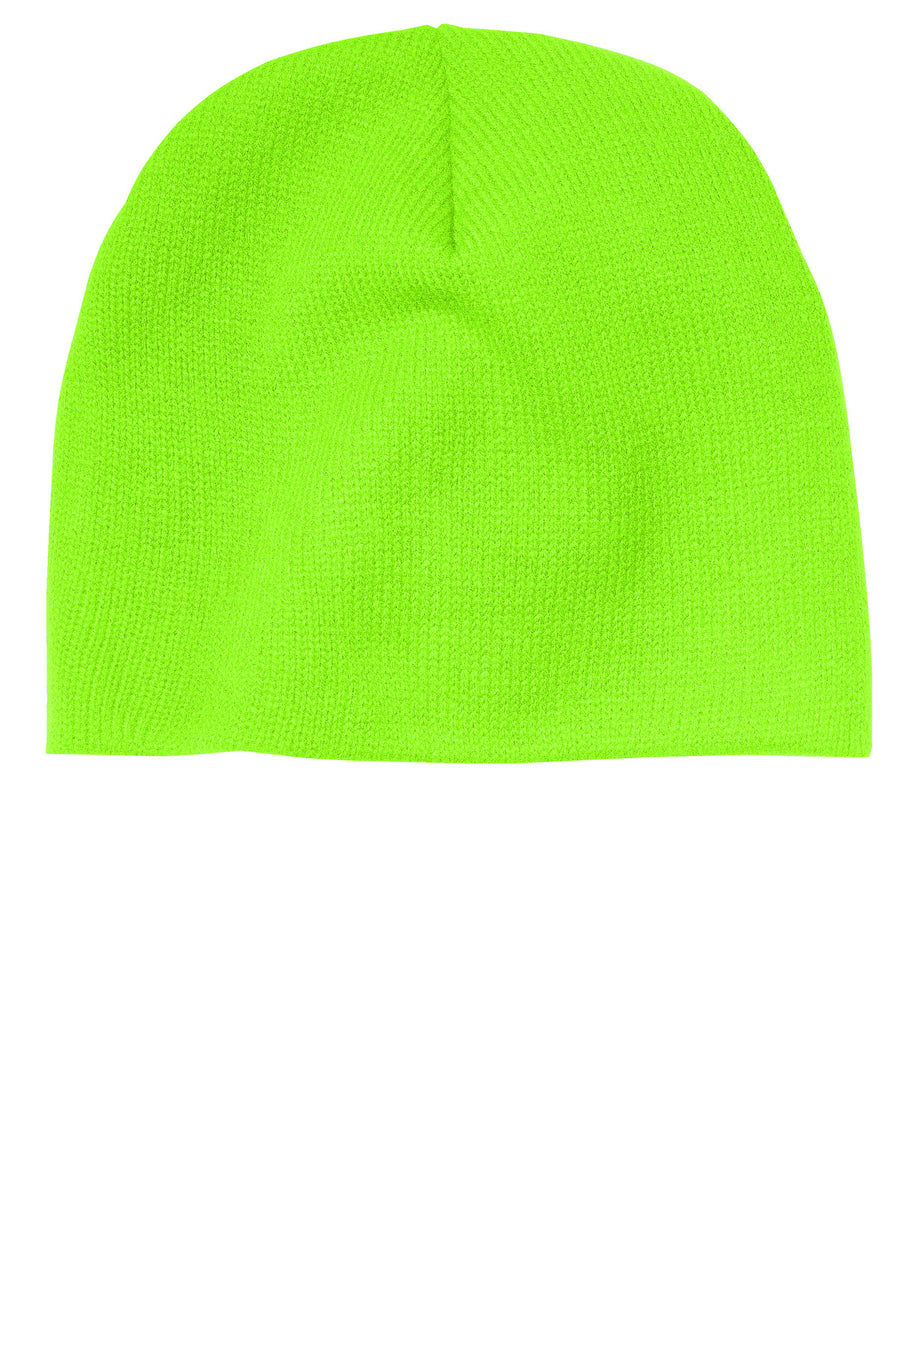 CP91-Neon Green-front_model